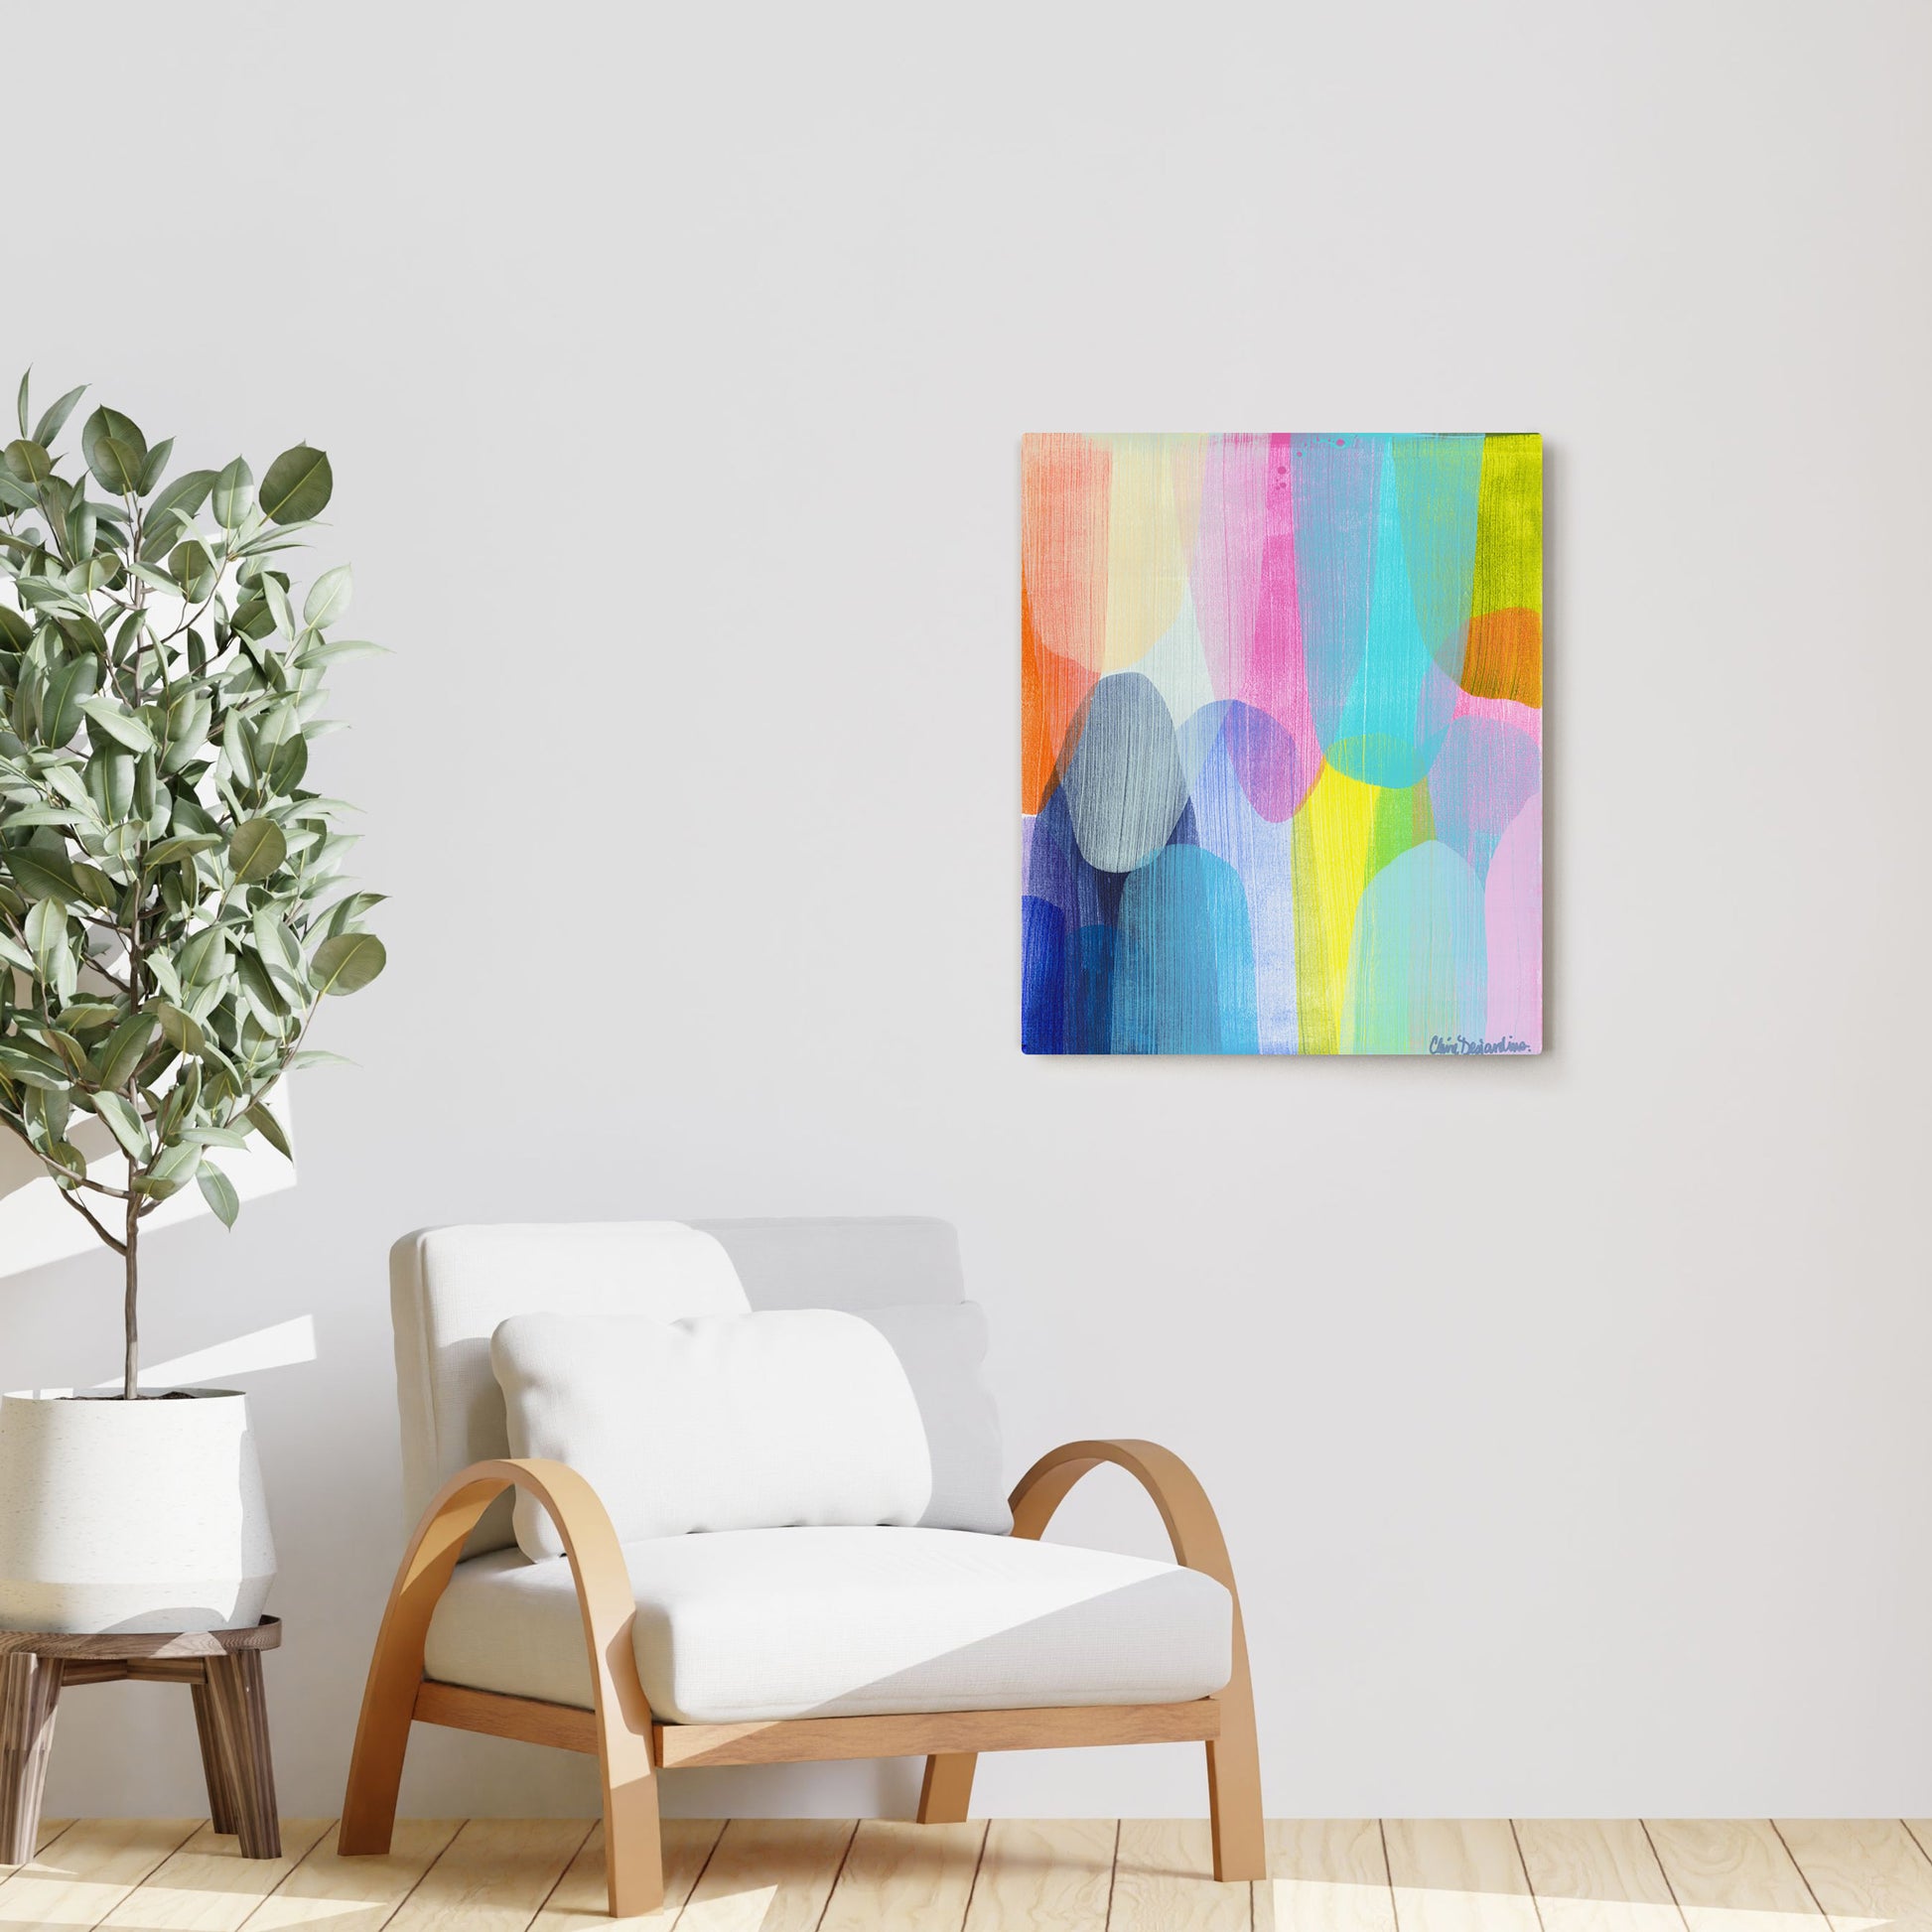 Claire Desjardins' Tickled Pink painting reproduced on HD metal print and displayed on wall